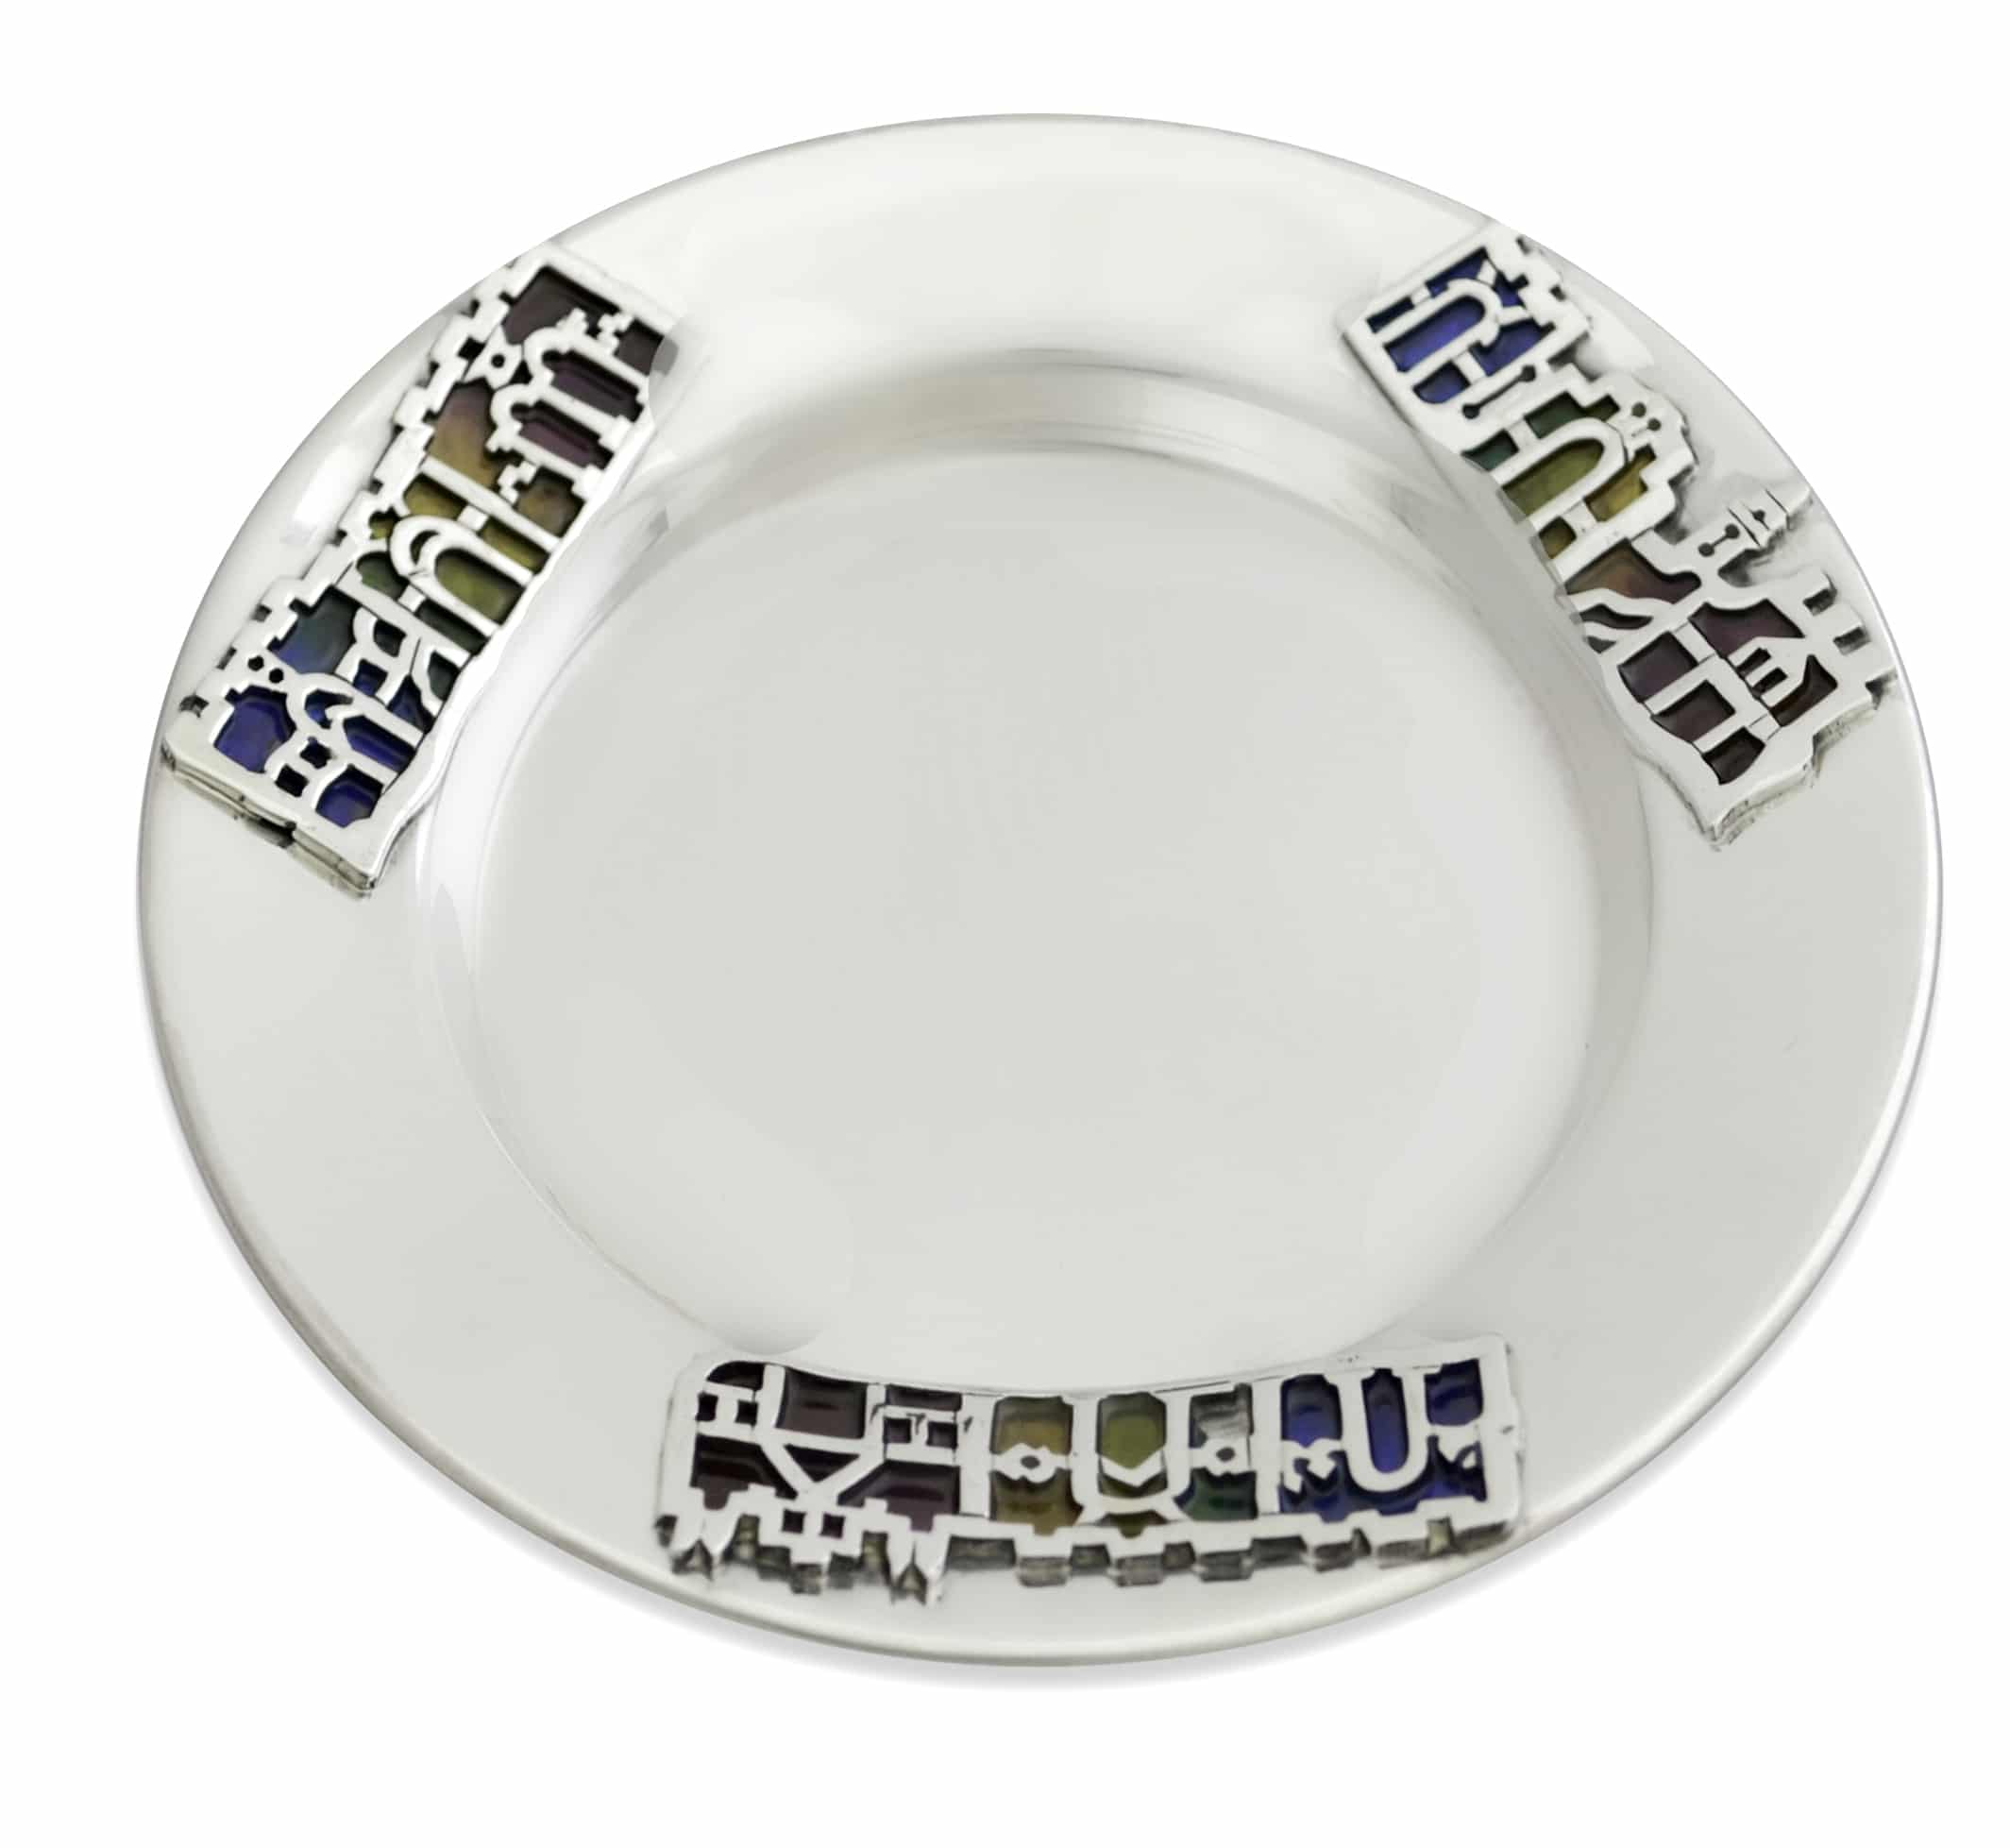 Jerusalem Shape Plate for Kiddush Cup Decorated with Enamel